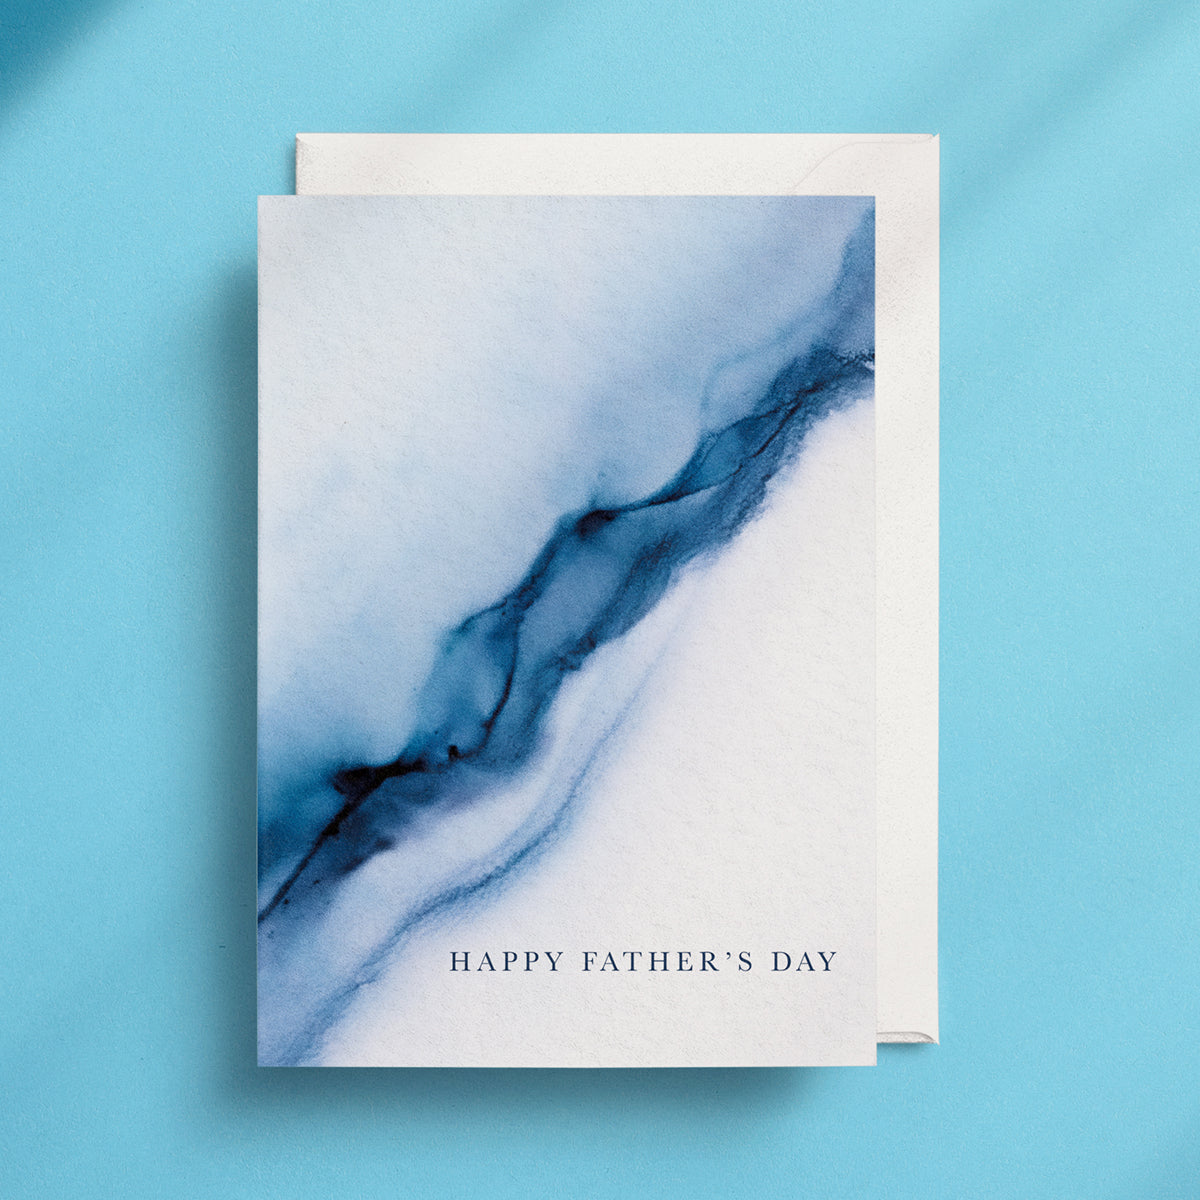 Happy Father's Day - Greeting Card